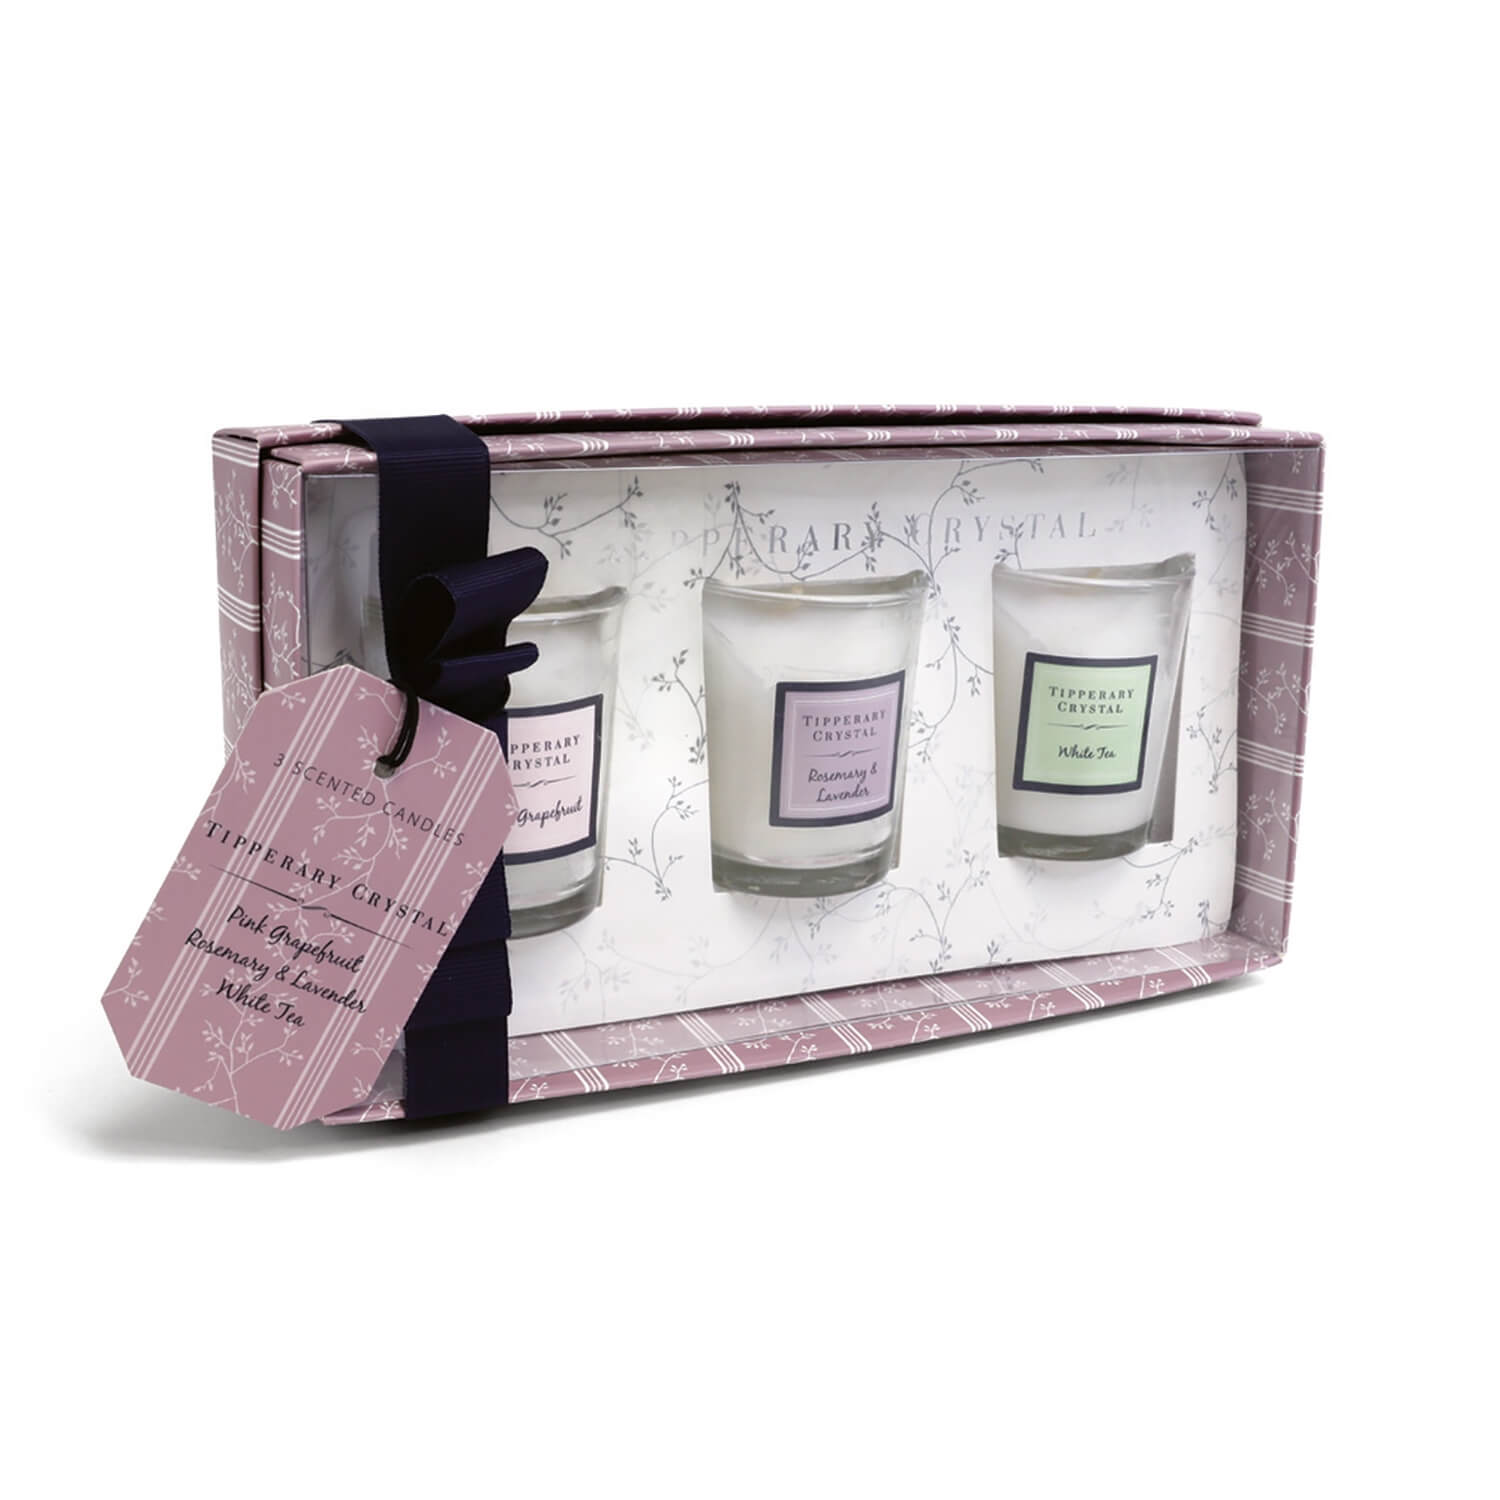 Tipperary Crystal Assorted Mini Candles Set Of 3 - Pink Grapefruit, Rosemary, White Tea 1 Shaws Department Stores